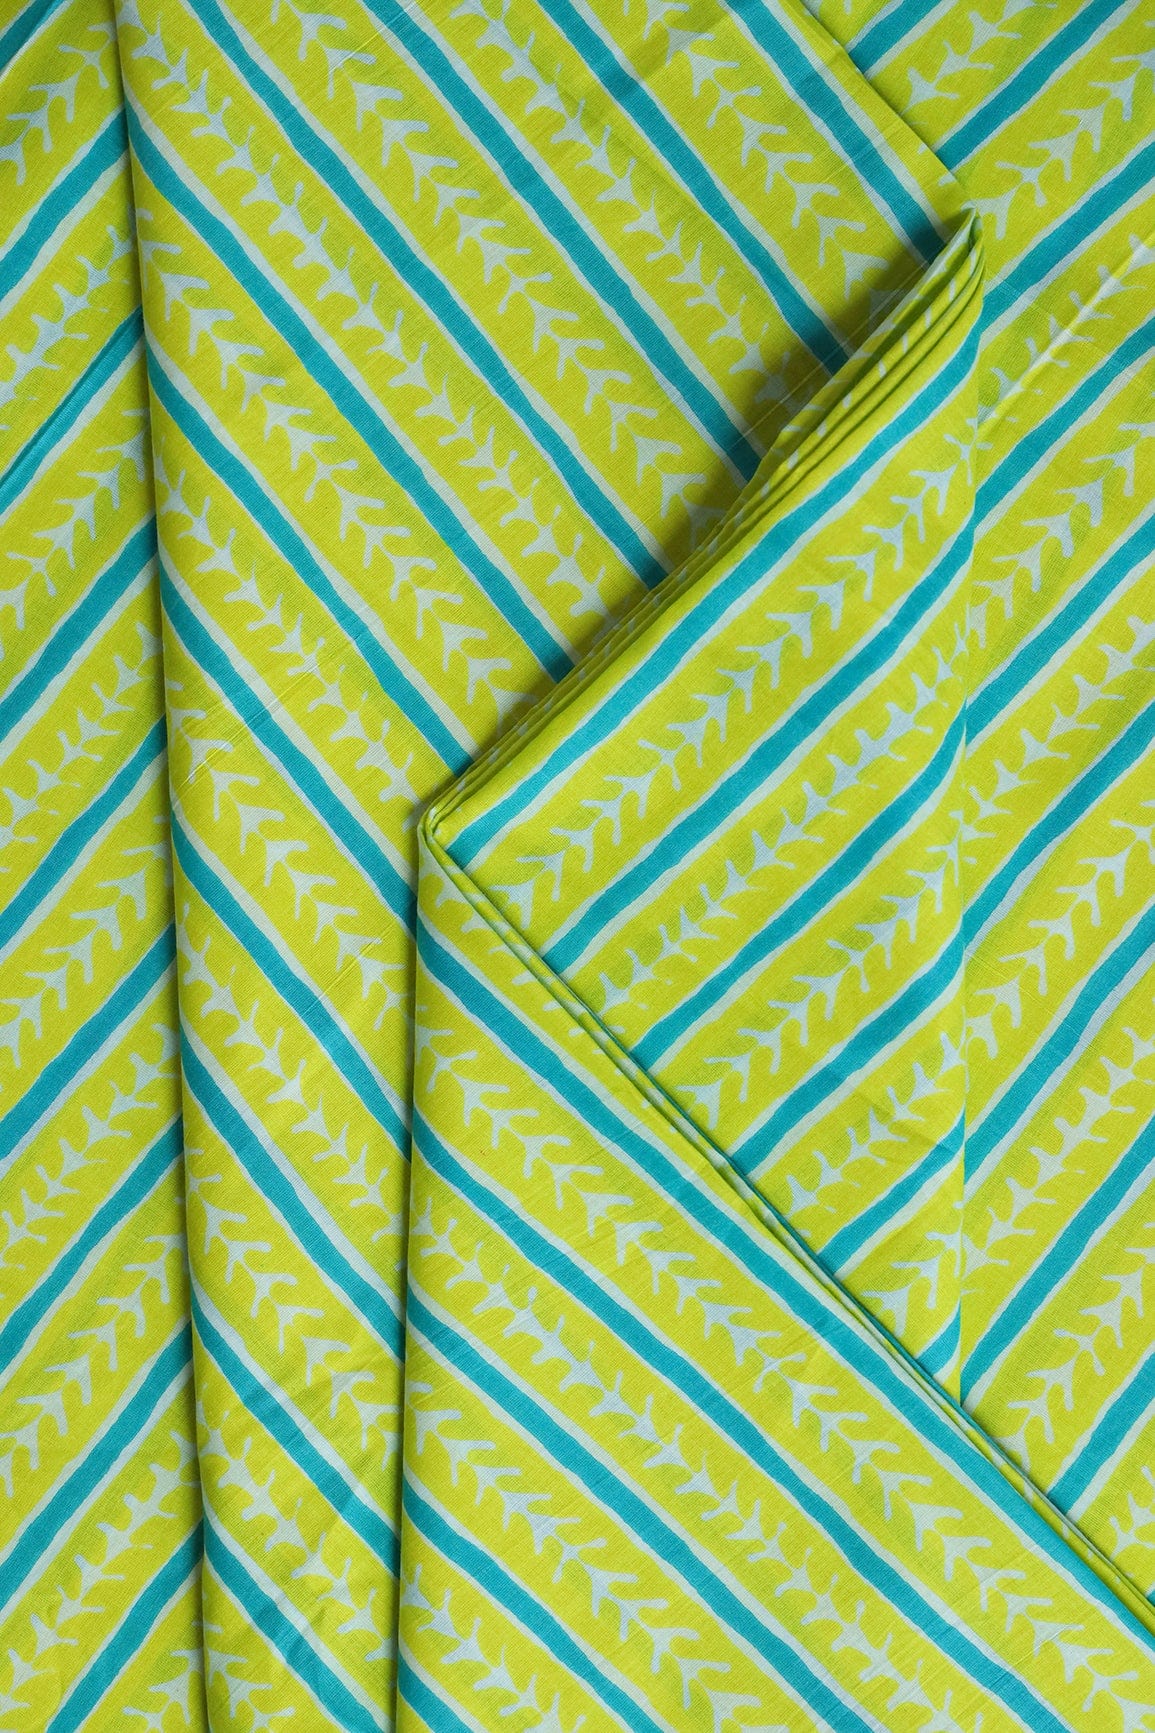 doeraa Prints Lemon Green And Turquoise Blue Stripes Print On Pure Mul Cotton Fabric